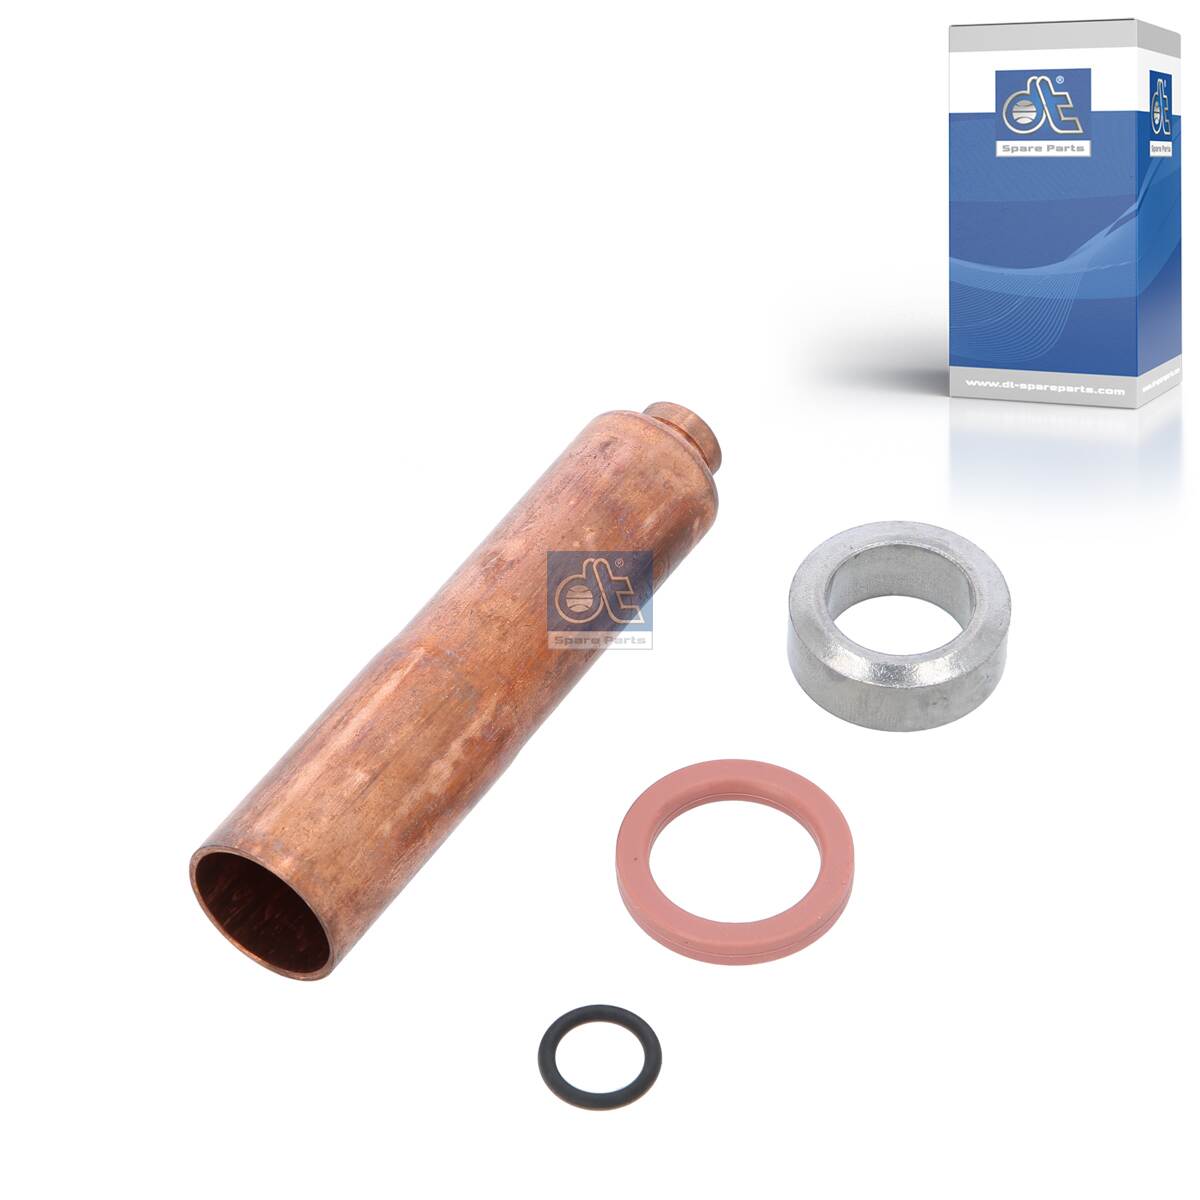 2.91216, Repair Kit, injector holder, DT Spare Parts, Volvo TD120F TD120FA TD120FB TD120FC TD120G TD120GA, 273822, 030.907, 03.13.065, 101567, 12489, 140.029-00, 140.029-00/01, 98580503, 2.91216DPH/36801, ISK-822, 140.029-00A, 2.91216DPH/37415, 36253, 36253DPH